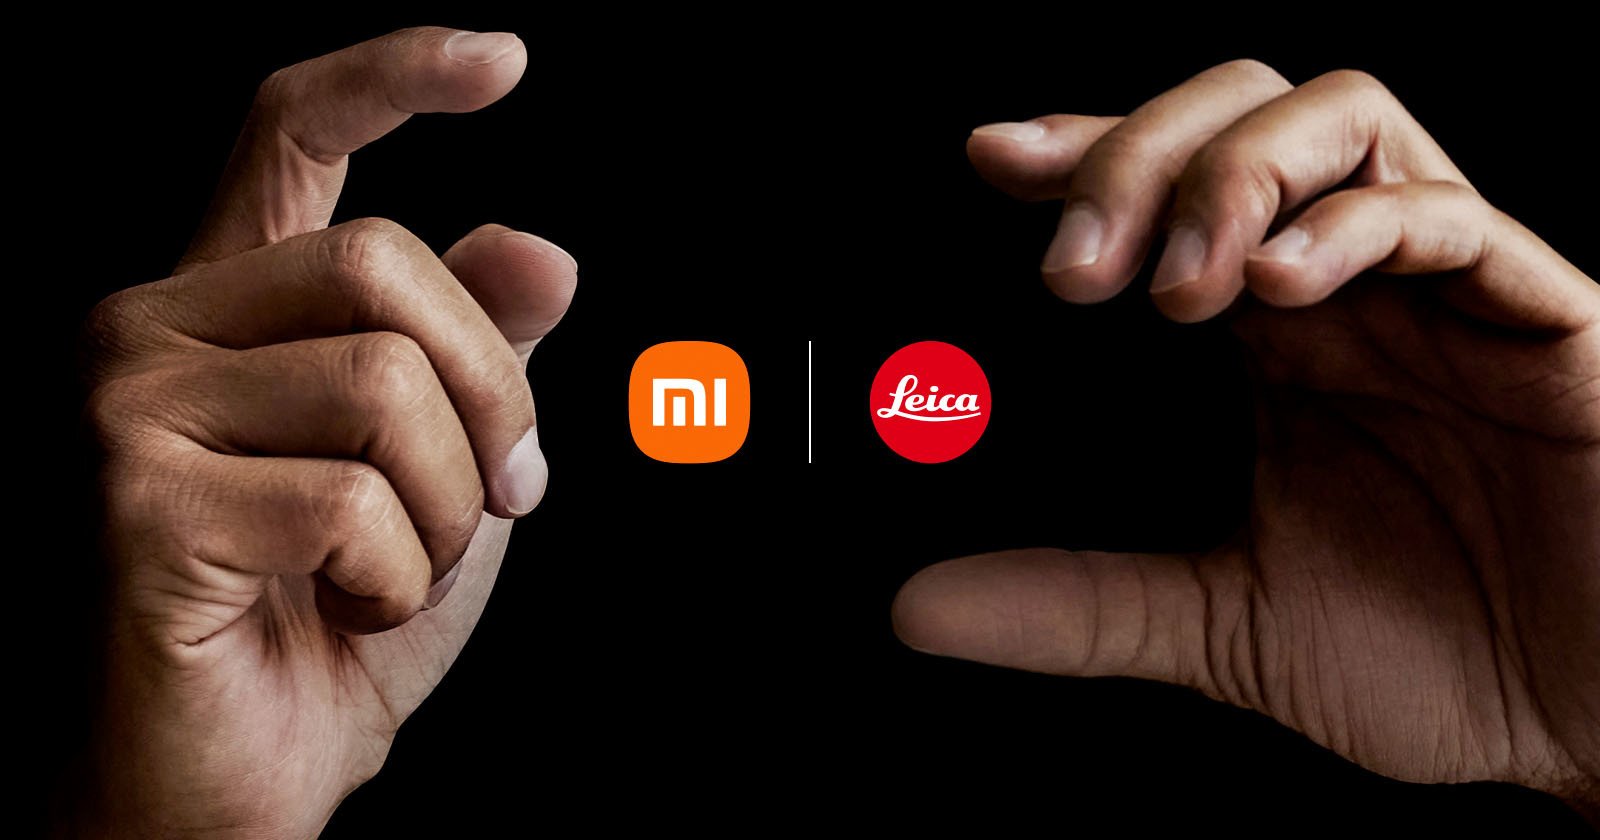 Xiaomi and Leica Partner To Launch Jointly Developed Smartphones